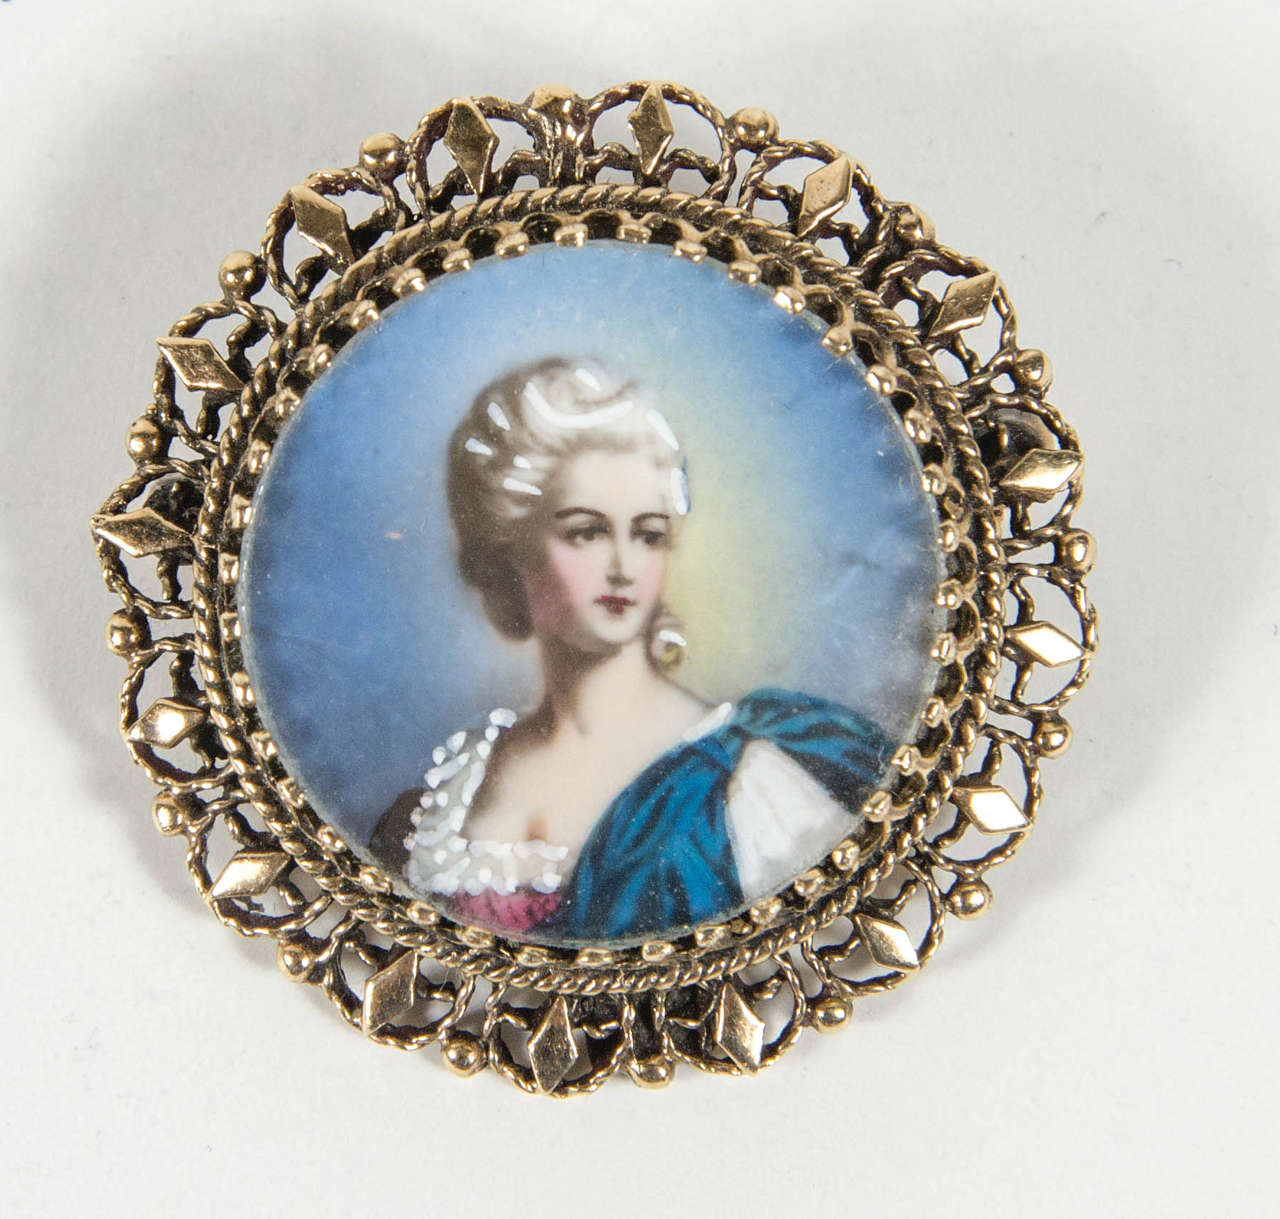 This very elegant brooch features a hand painted portrait fitted in a 14k yellow gold  Renaissance revival surround. It is marked 14k as well.